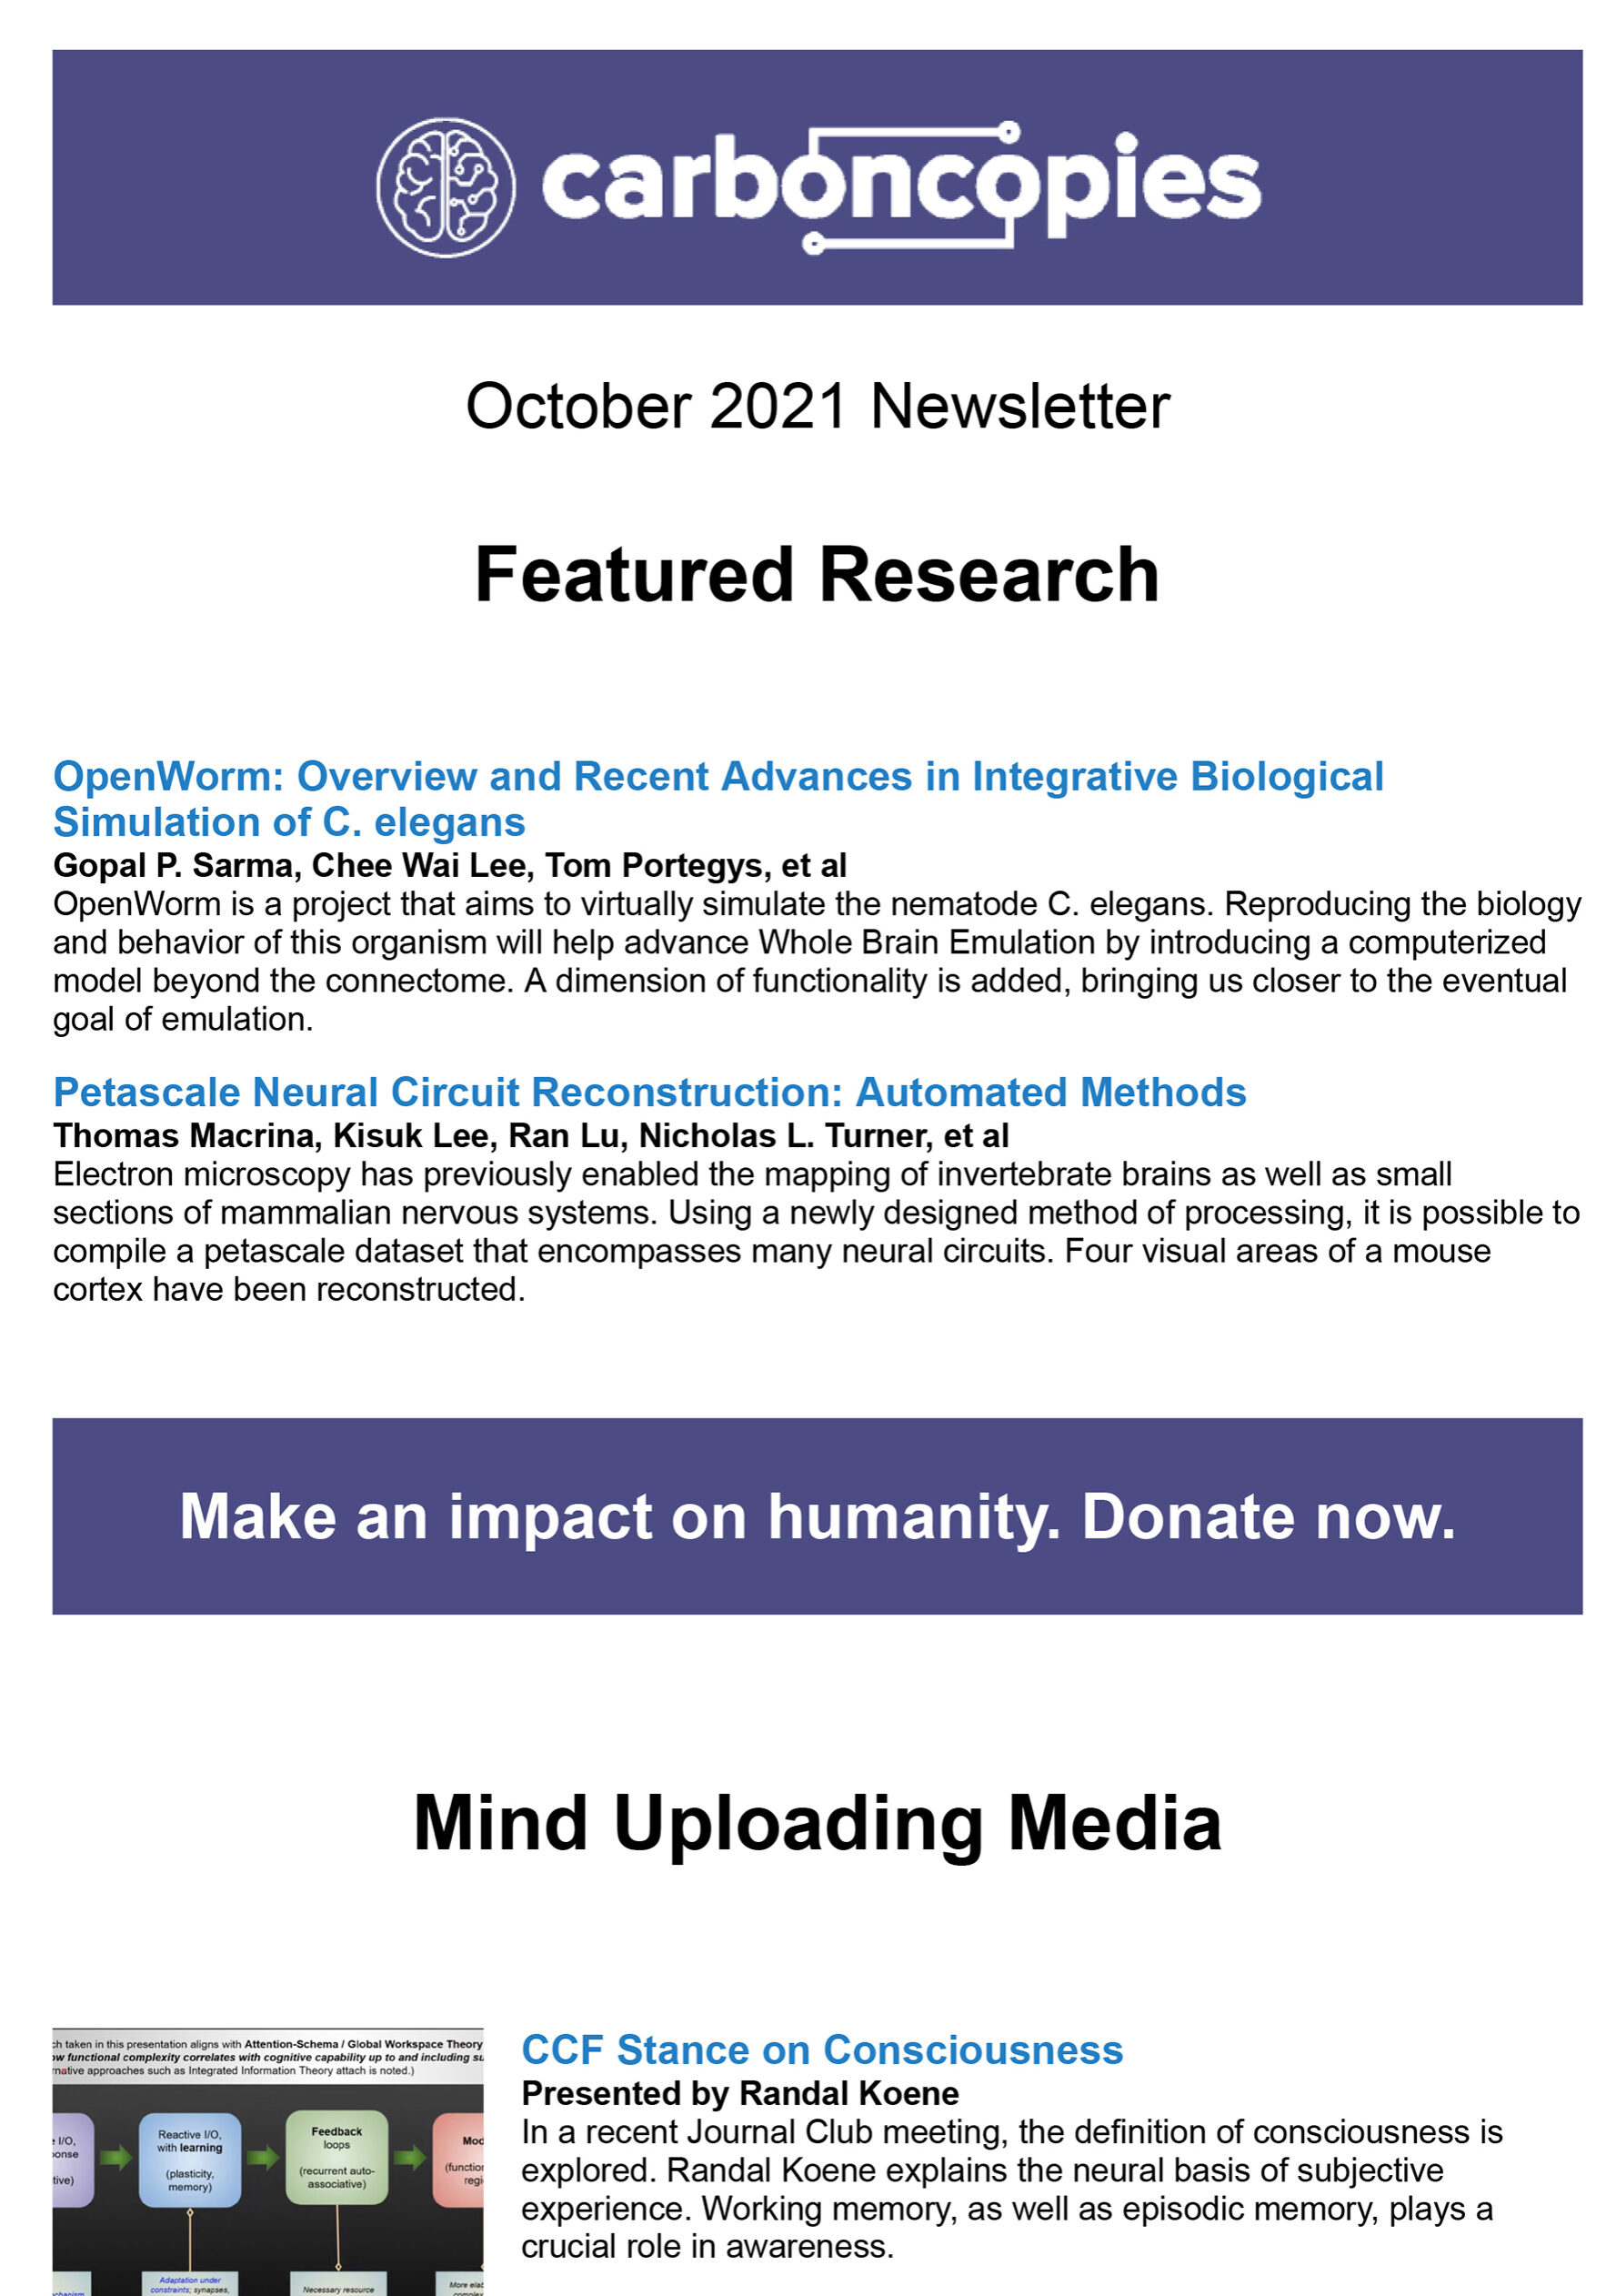 Carboncopies Foundation for Substrate-Independent Minds, Inc. Mail - Carboncopies October 2021 Newsletter-1